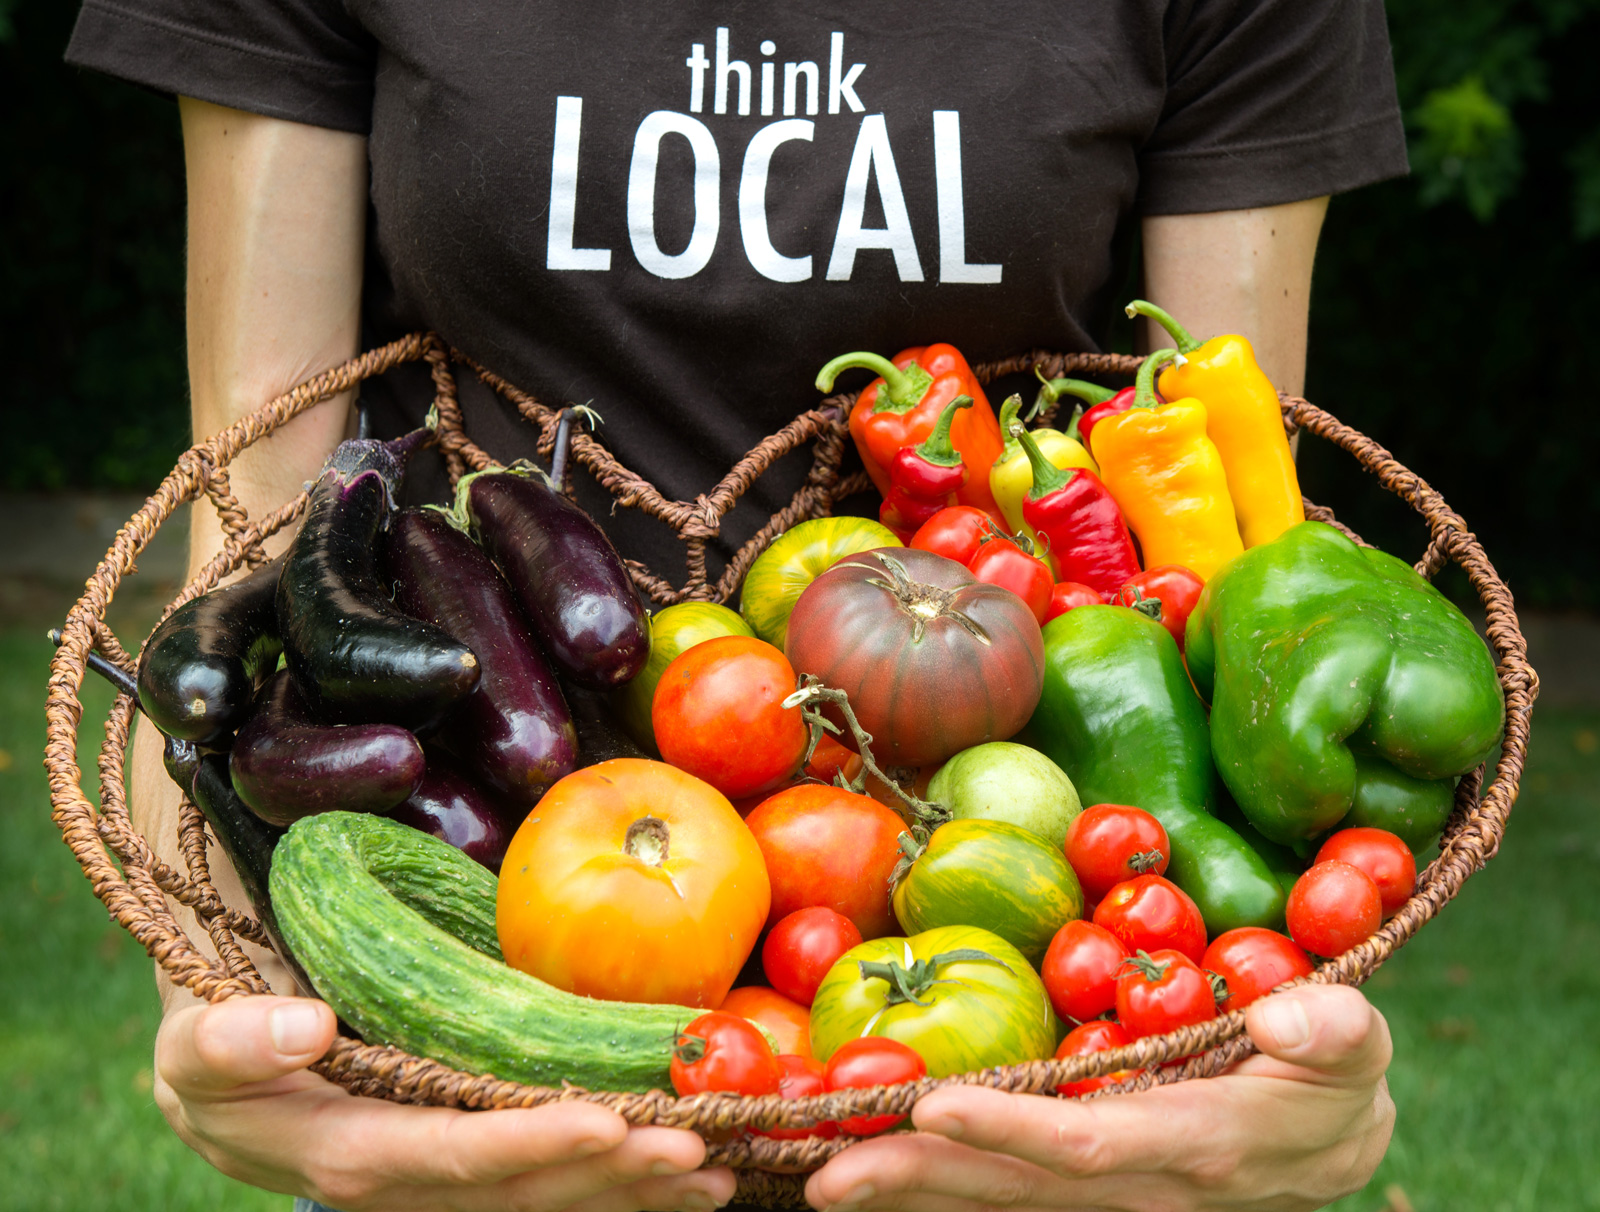 holding-a-basket-of-local-produce